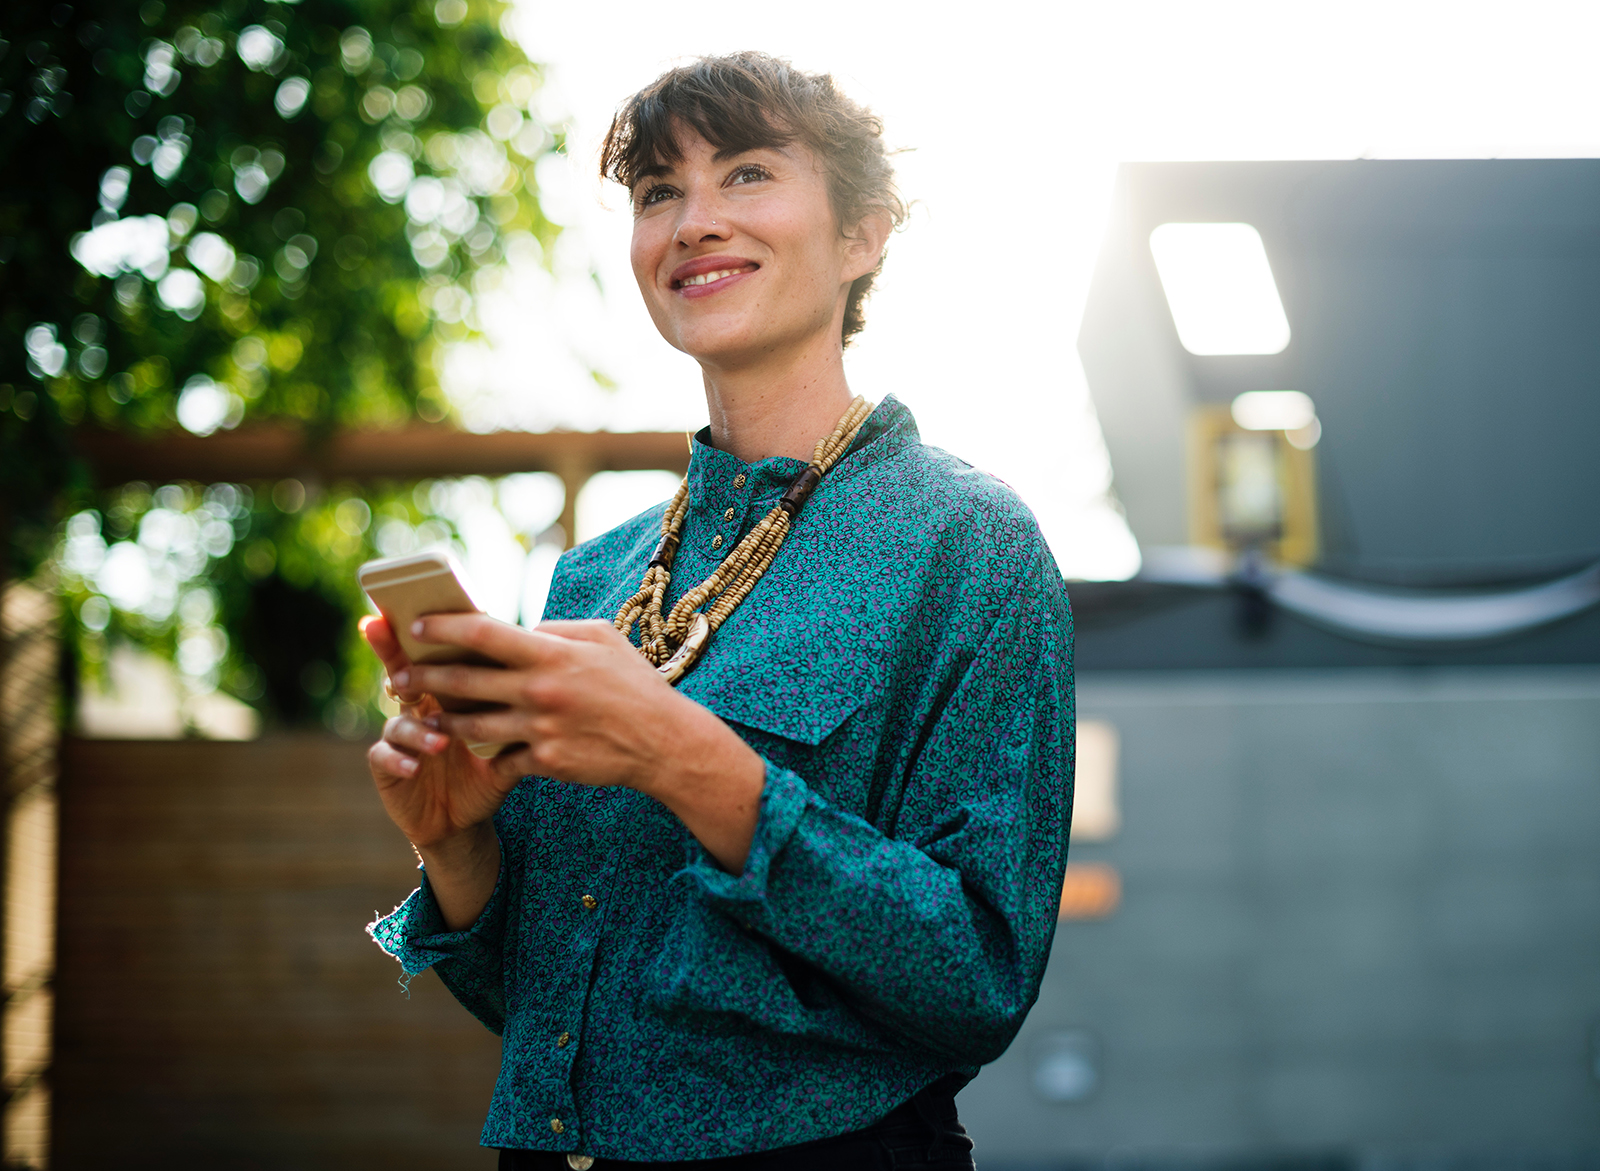 Lady smiling while holding a smart phone, embracing a digital product